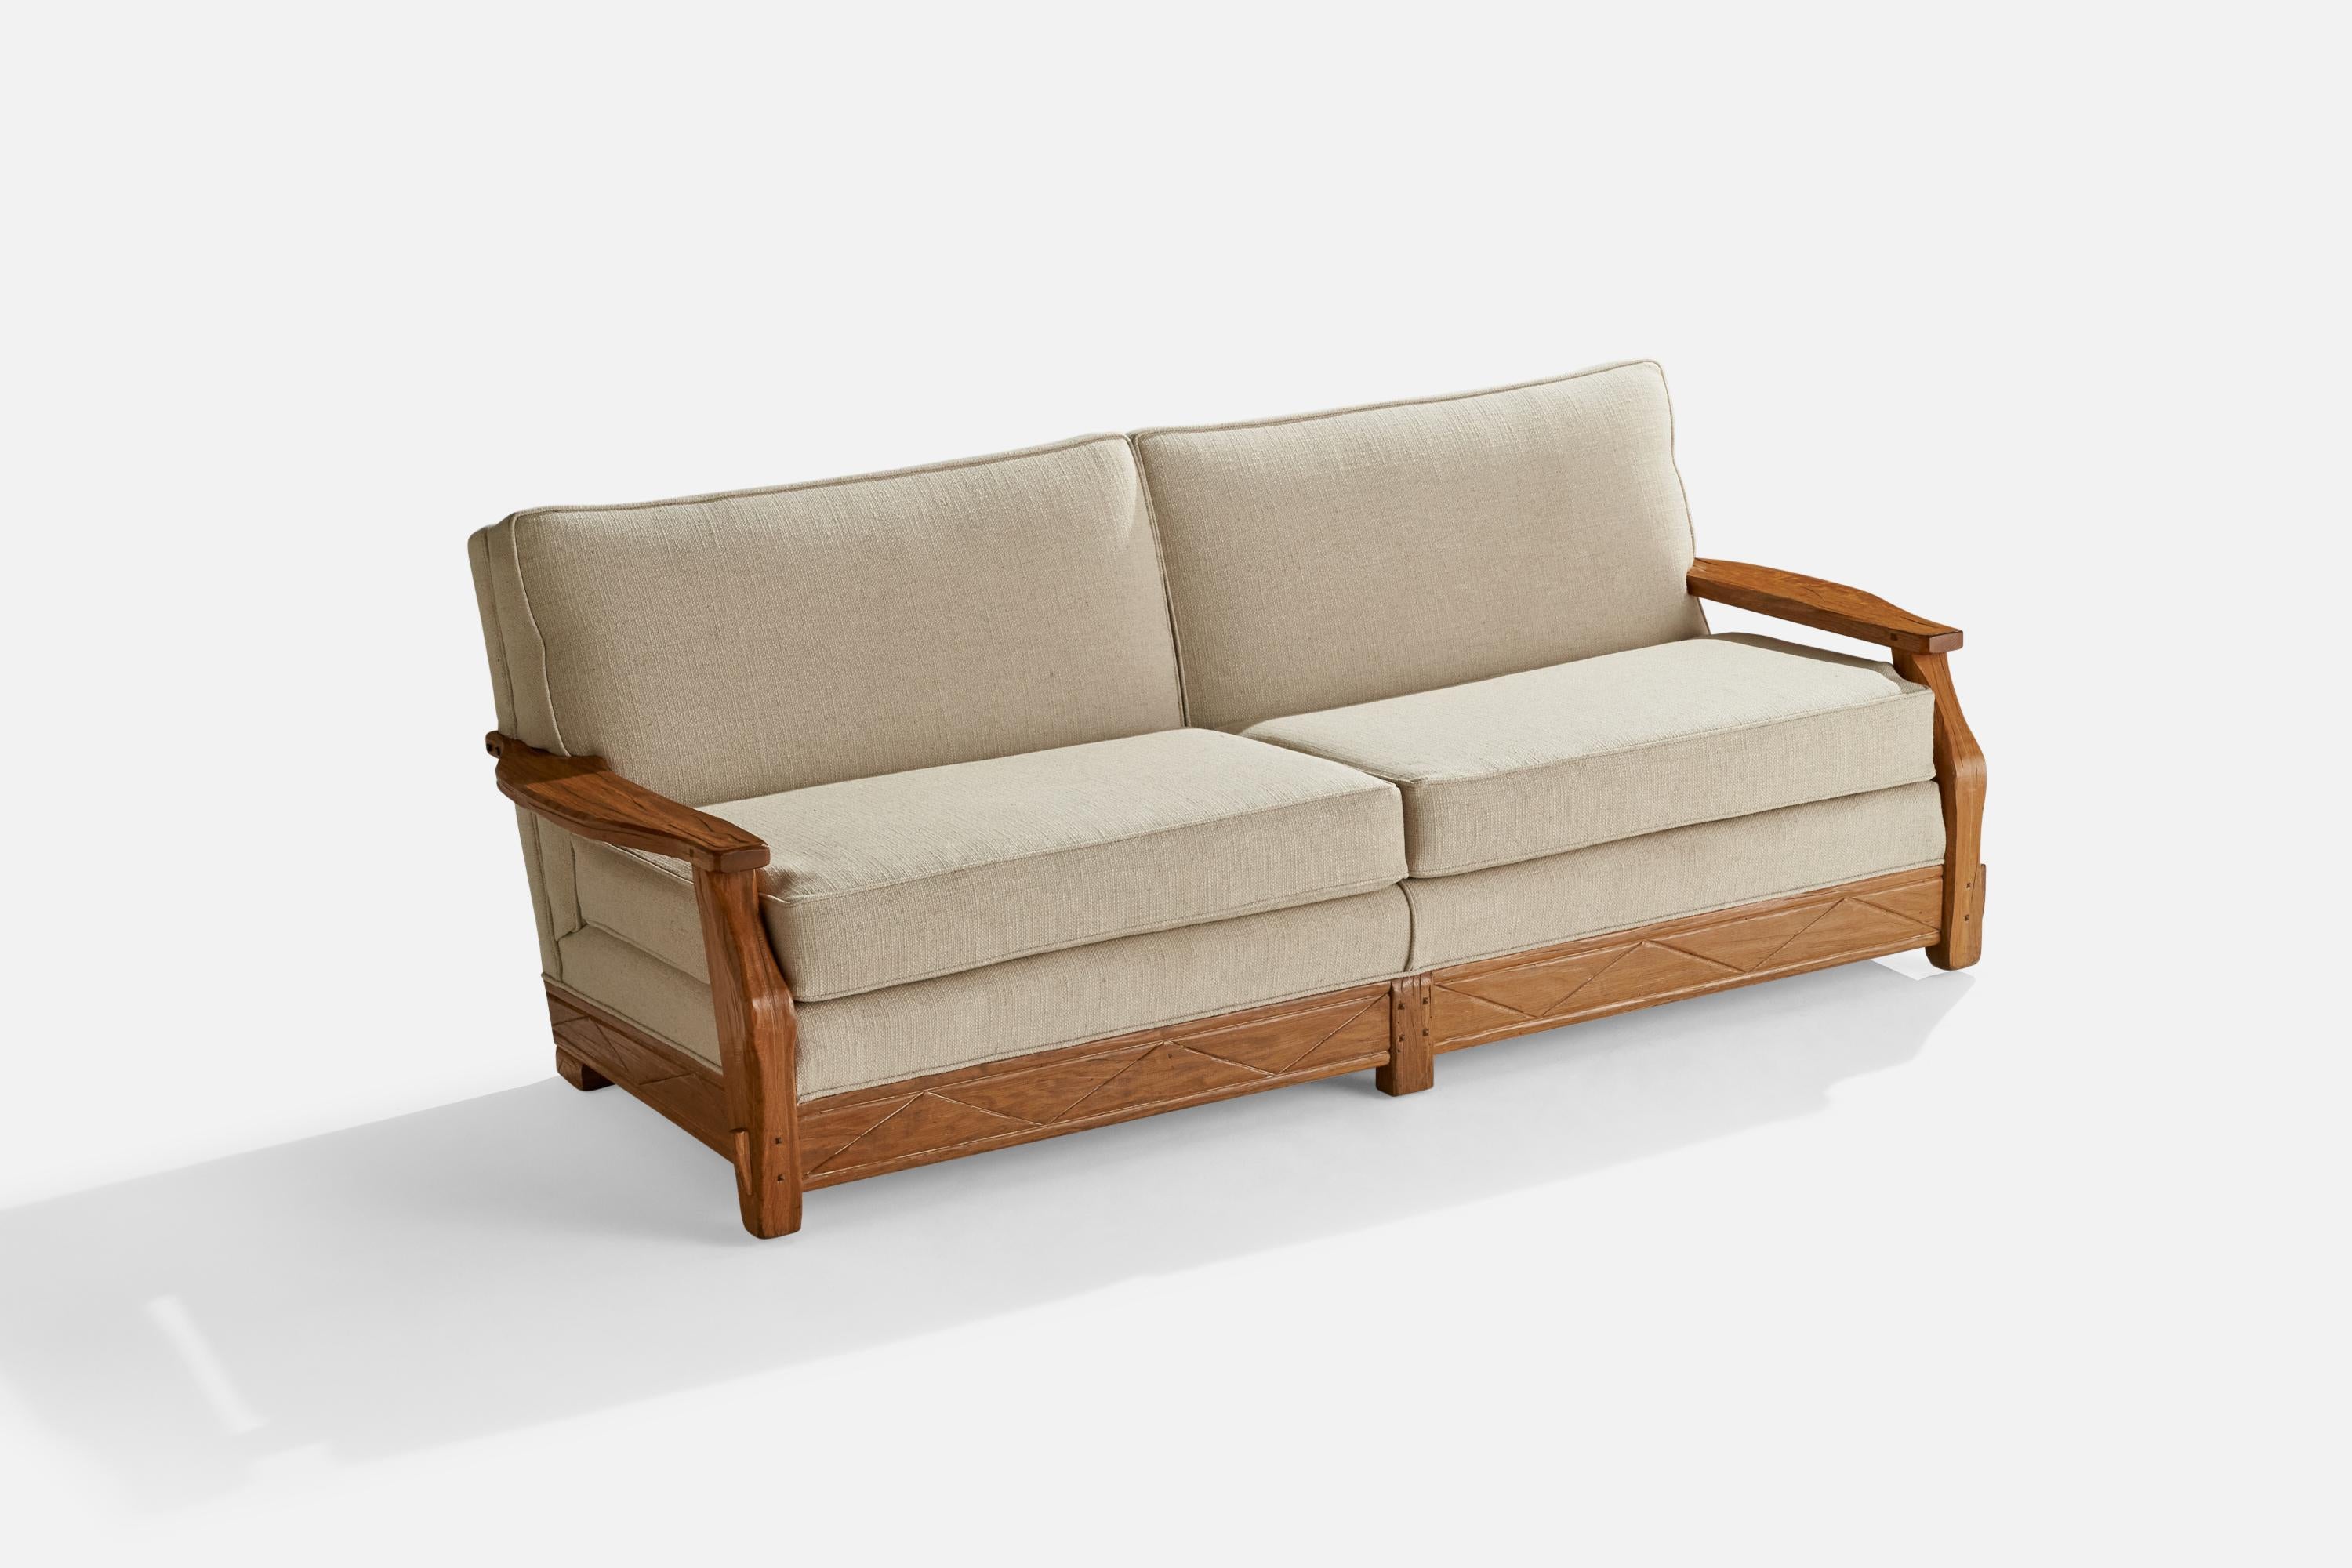 An oak and off-white fabric sofa designed and produced by A. Brandt Ranch Oak, USA, c. 1950s.

Seat height 18”.